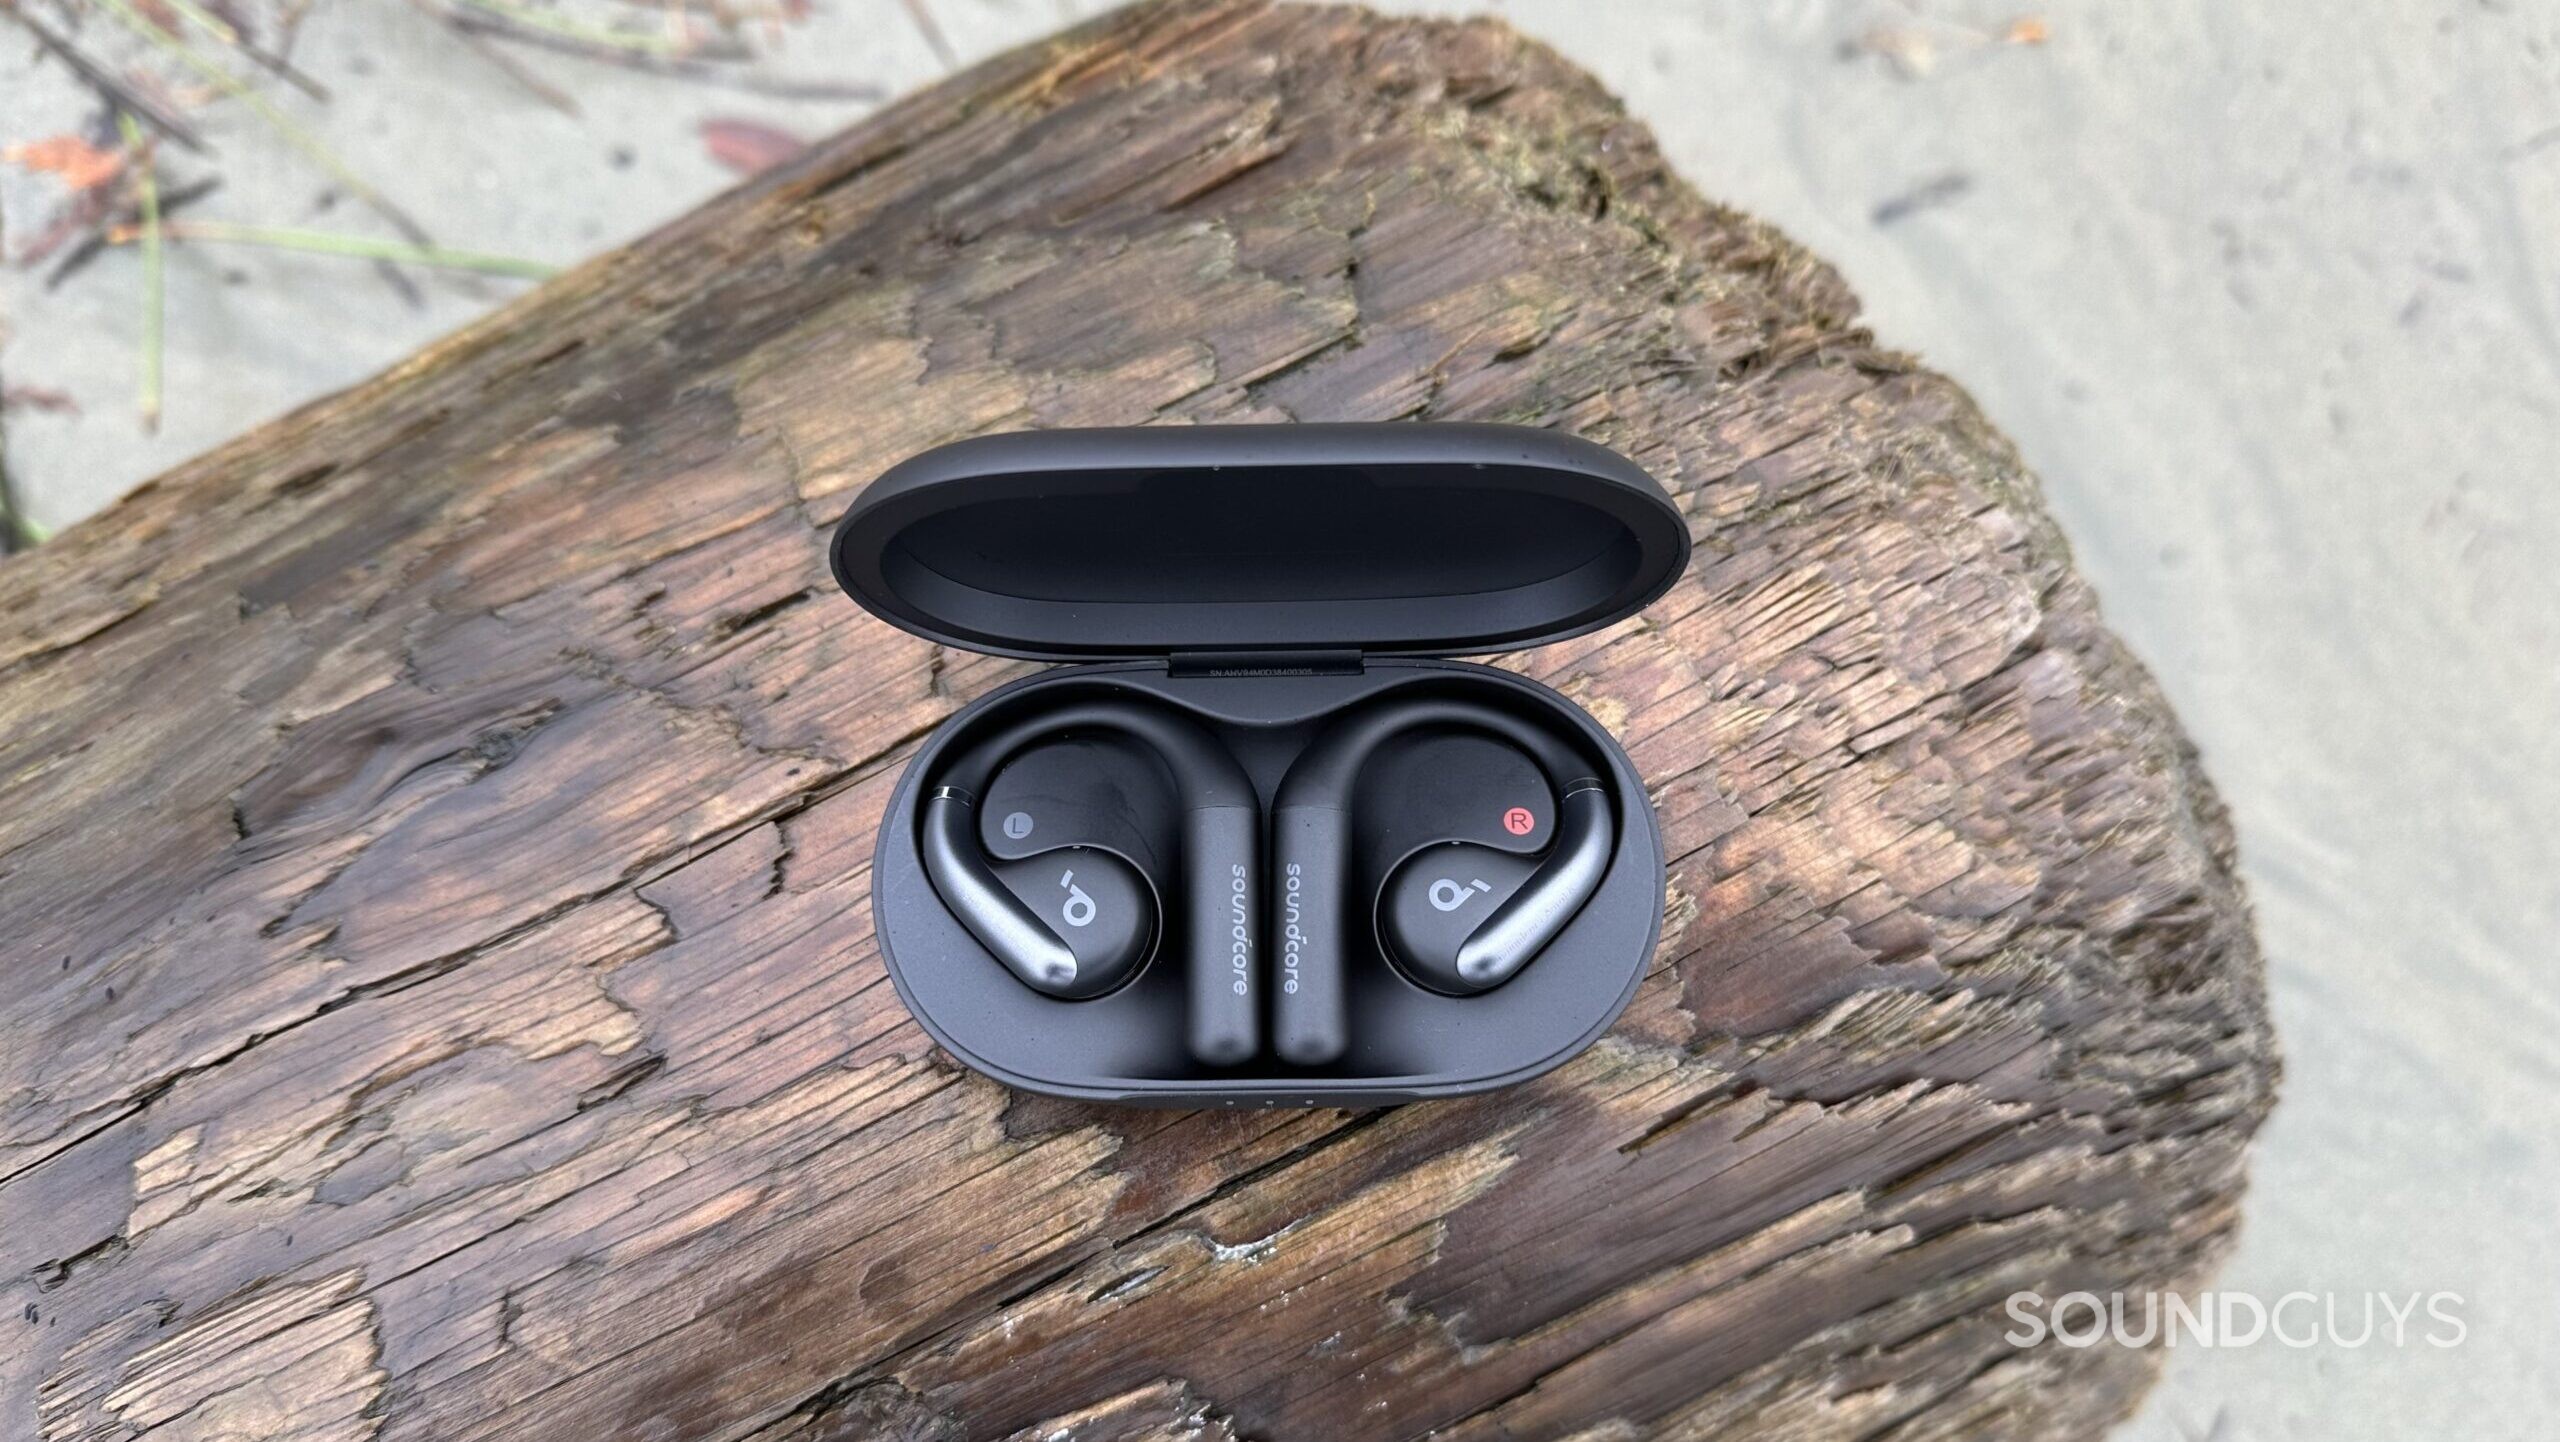 AeroFit earbuds in their charging case.